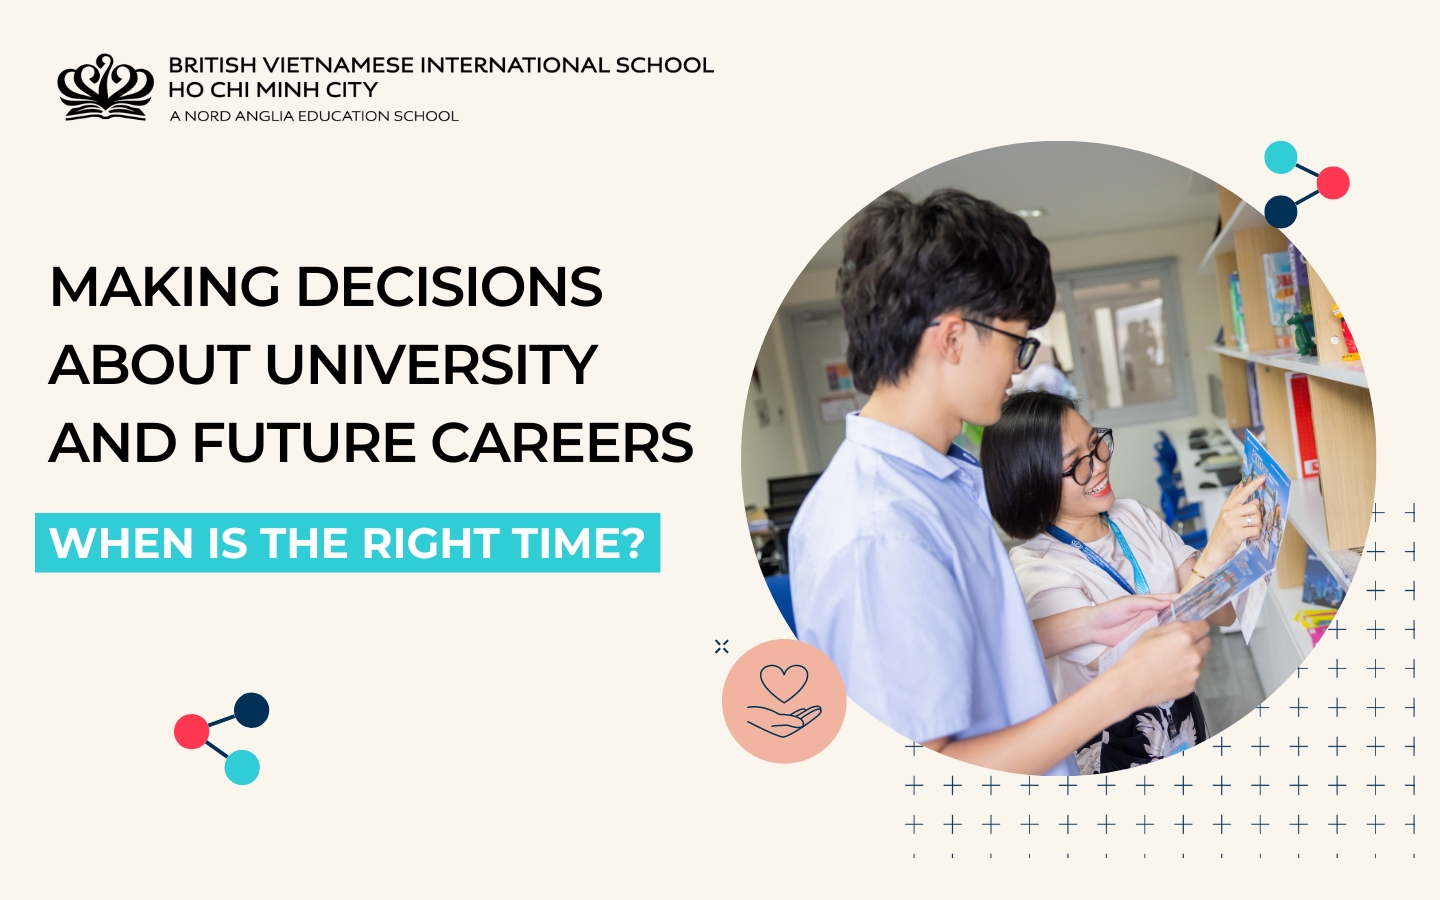 Making decisions about university and future careers: When is the right time? - Making decisions about university and future careers When is the right time